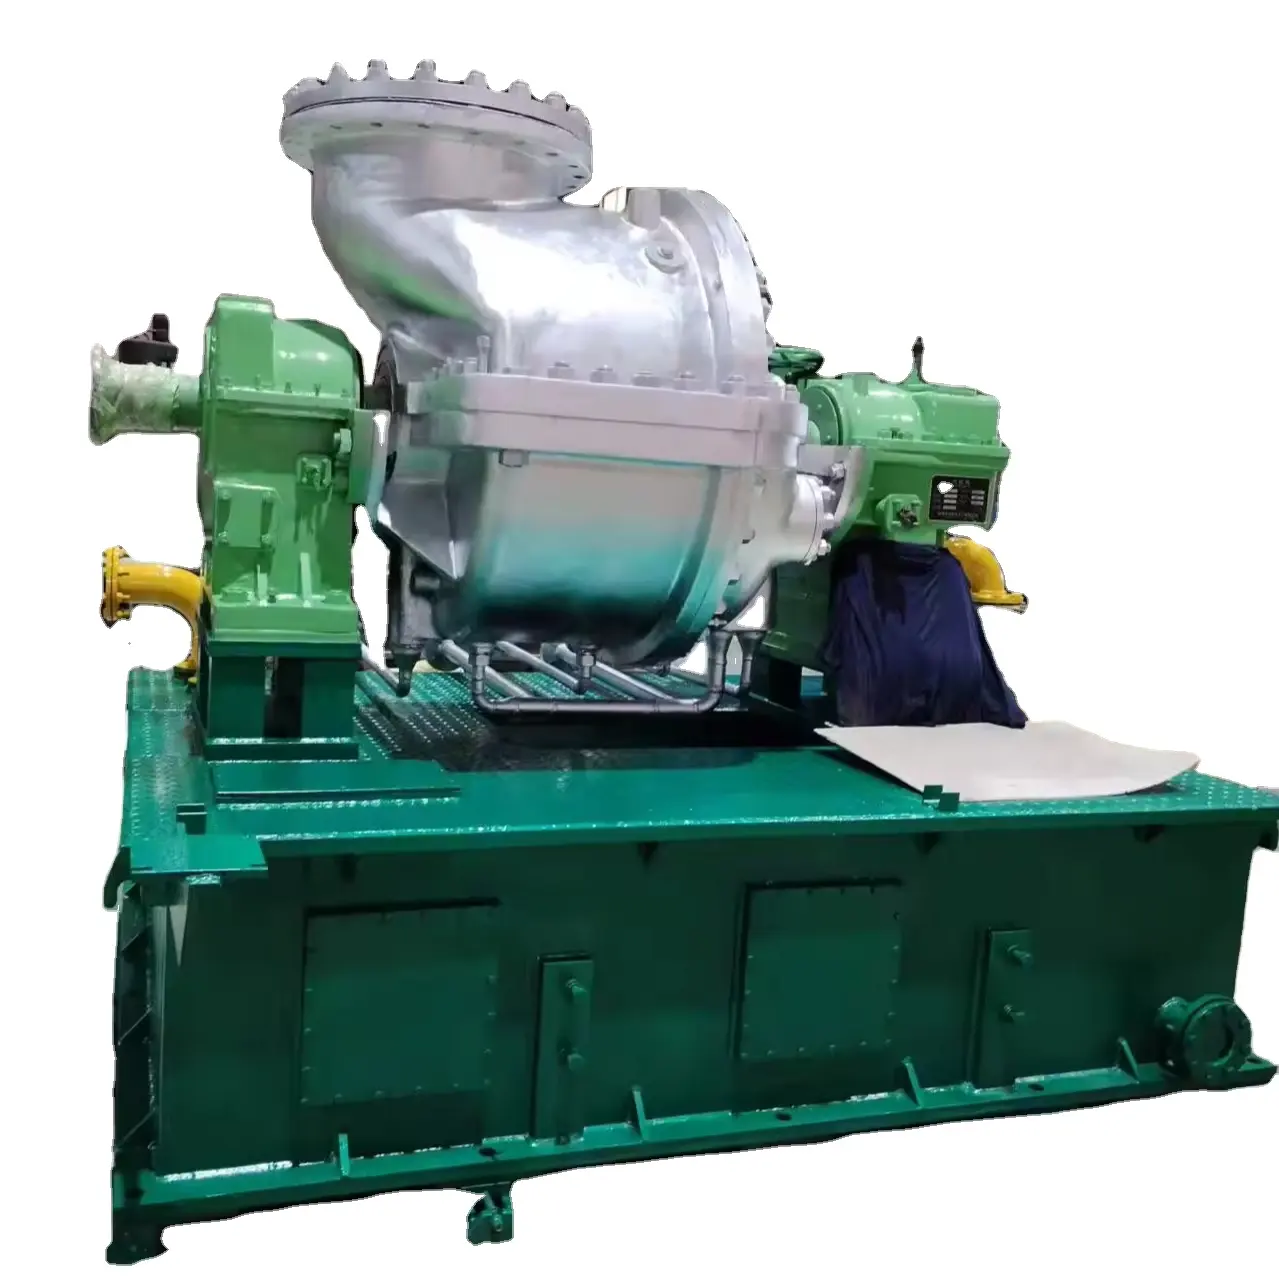 Factory Price Hot Sell Steam Turbine With High Efficiency And High Quality And Industrial Gas Generator With Energy Saving